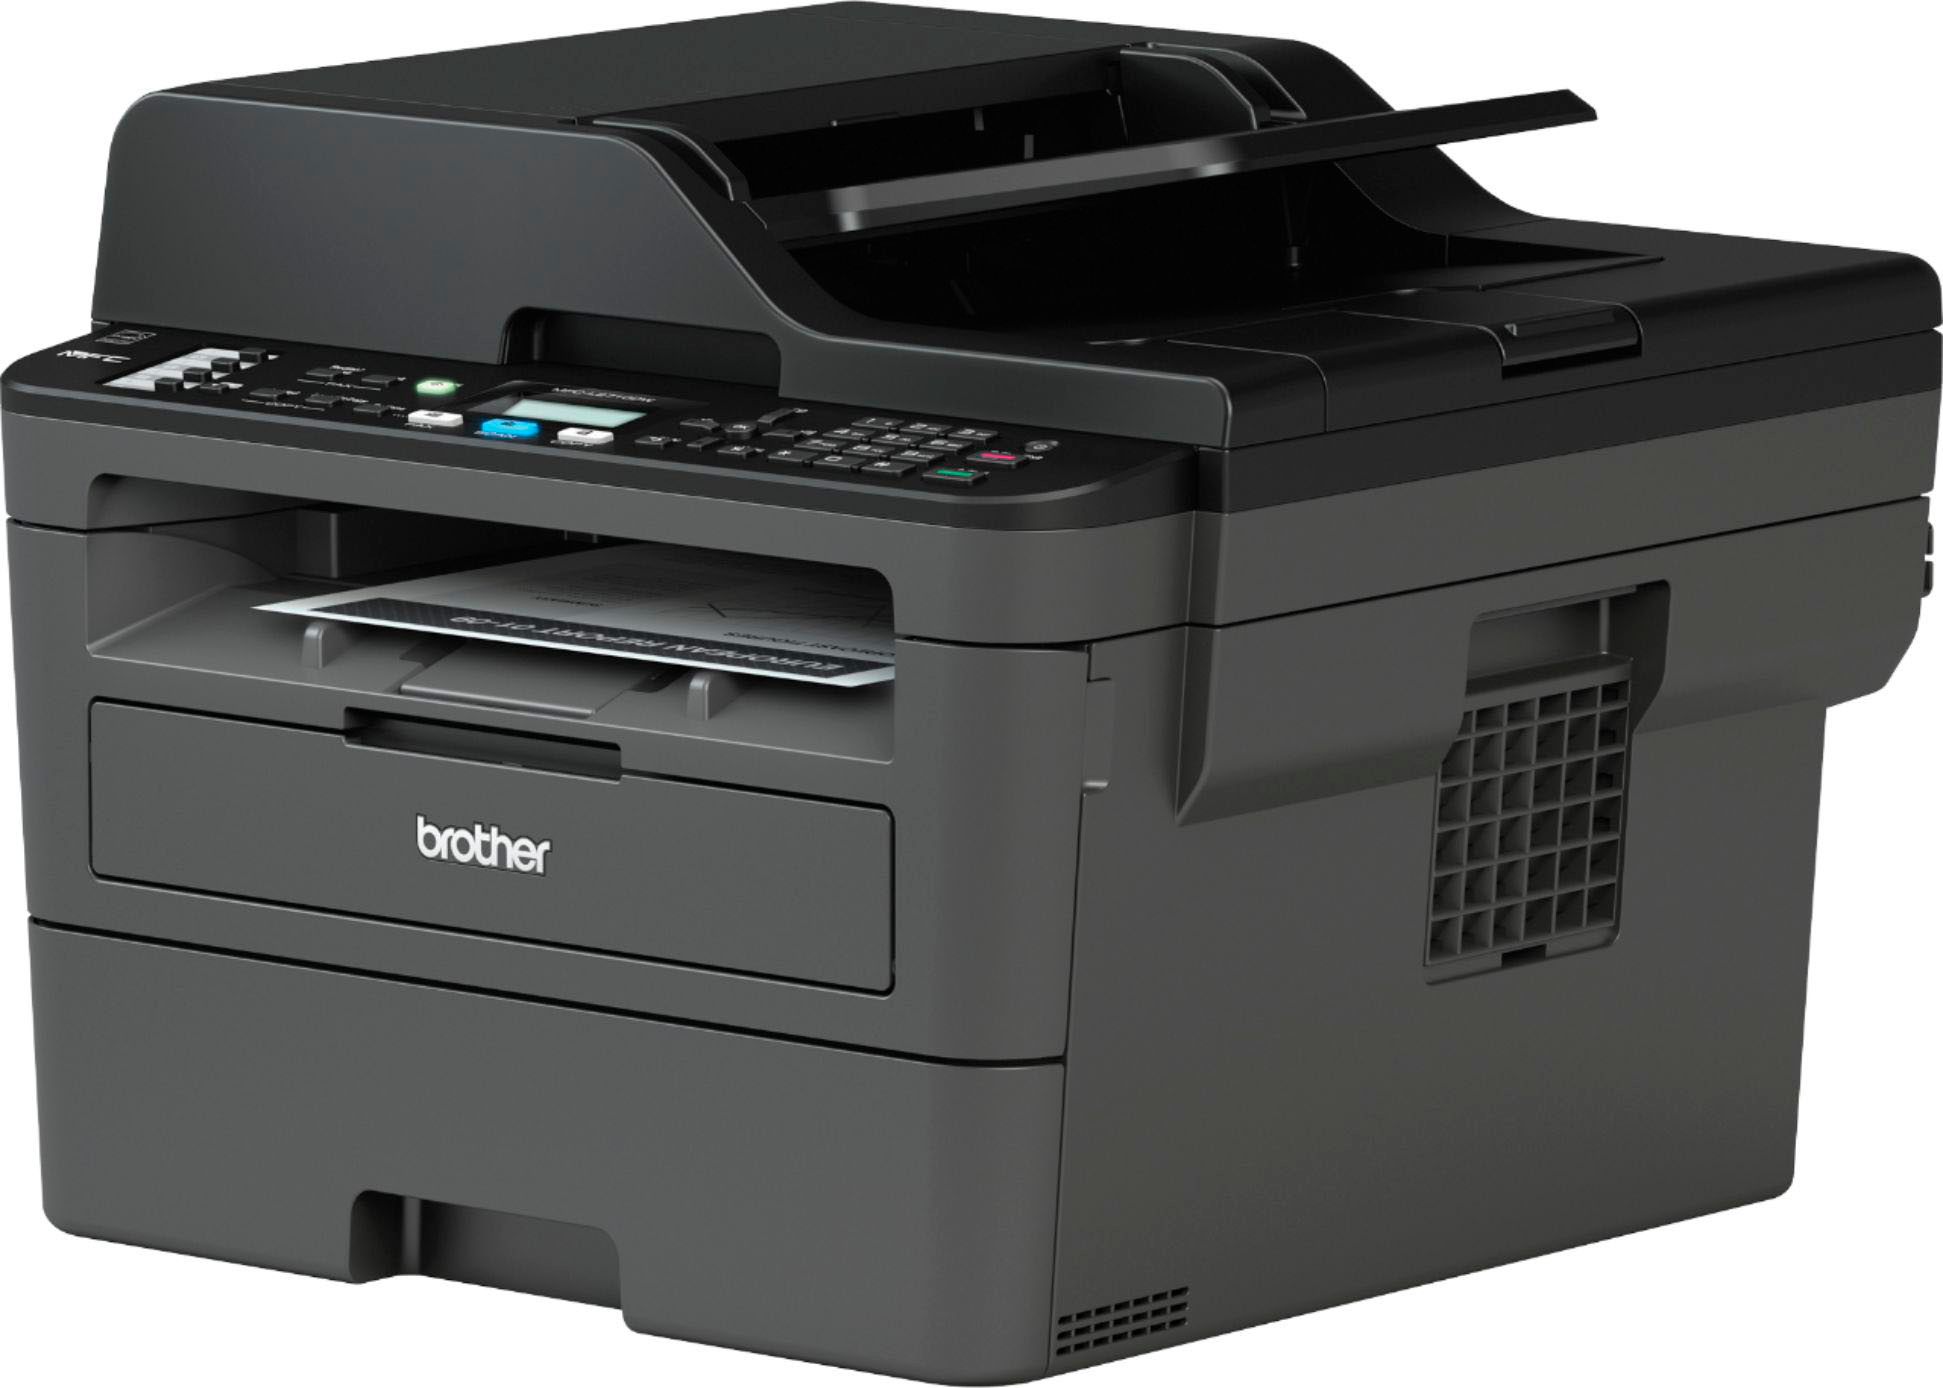 Buy BROTHER DCP1612W Monochrome All-in-One Wireless Laser Printer